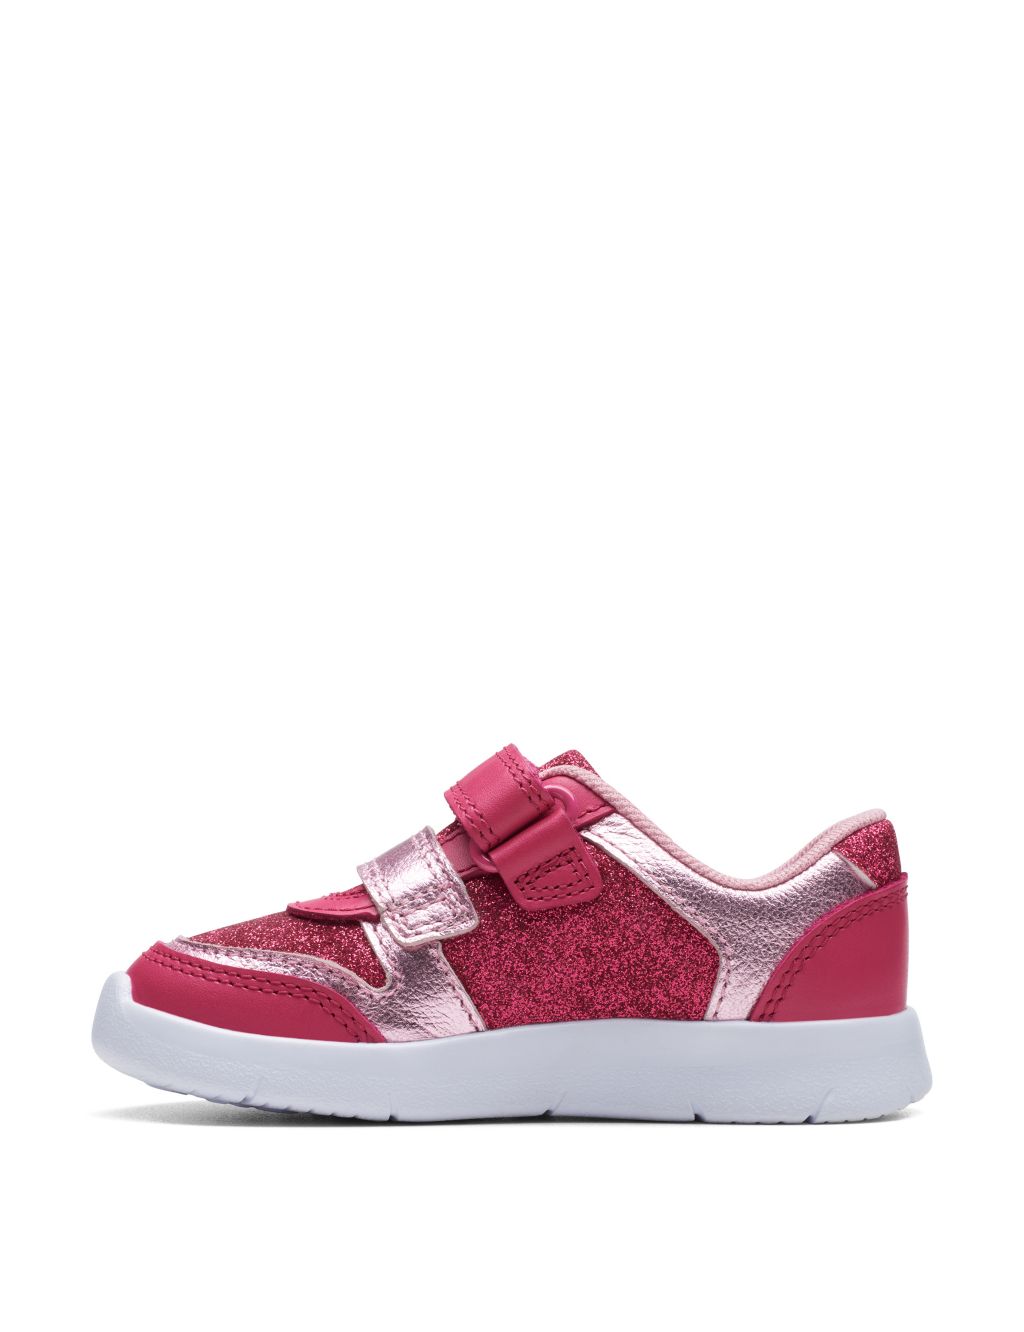 Kids' Leather Glitter Riptape Trainers (3 Small - 6½ Small) image 6